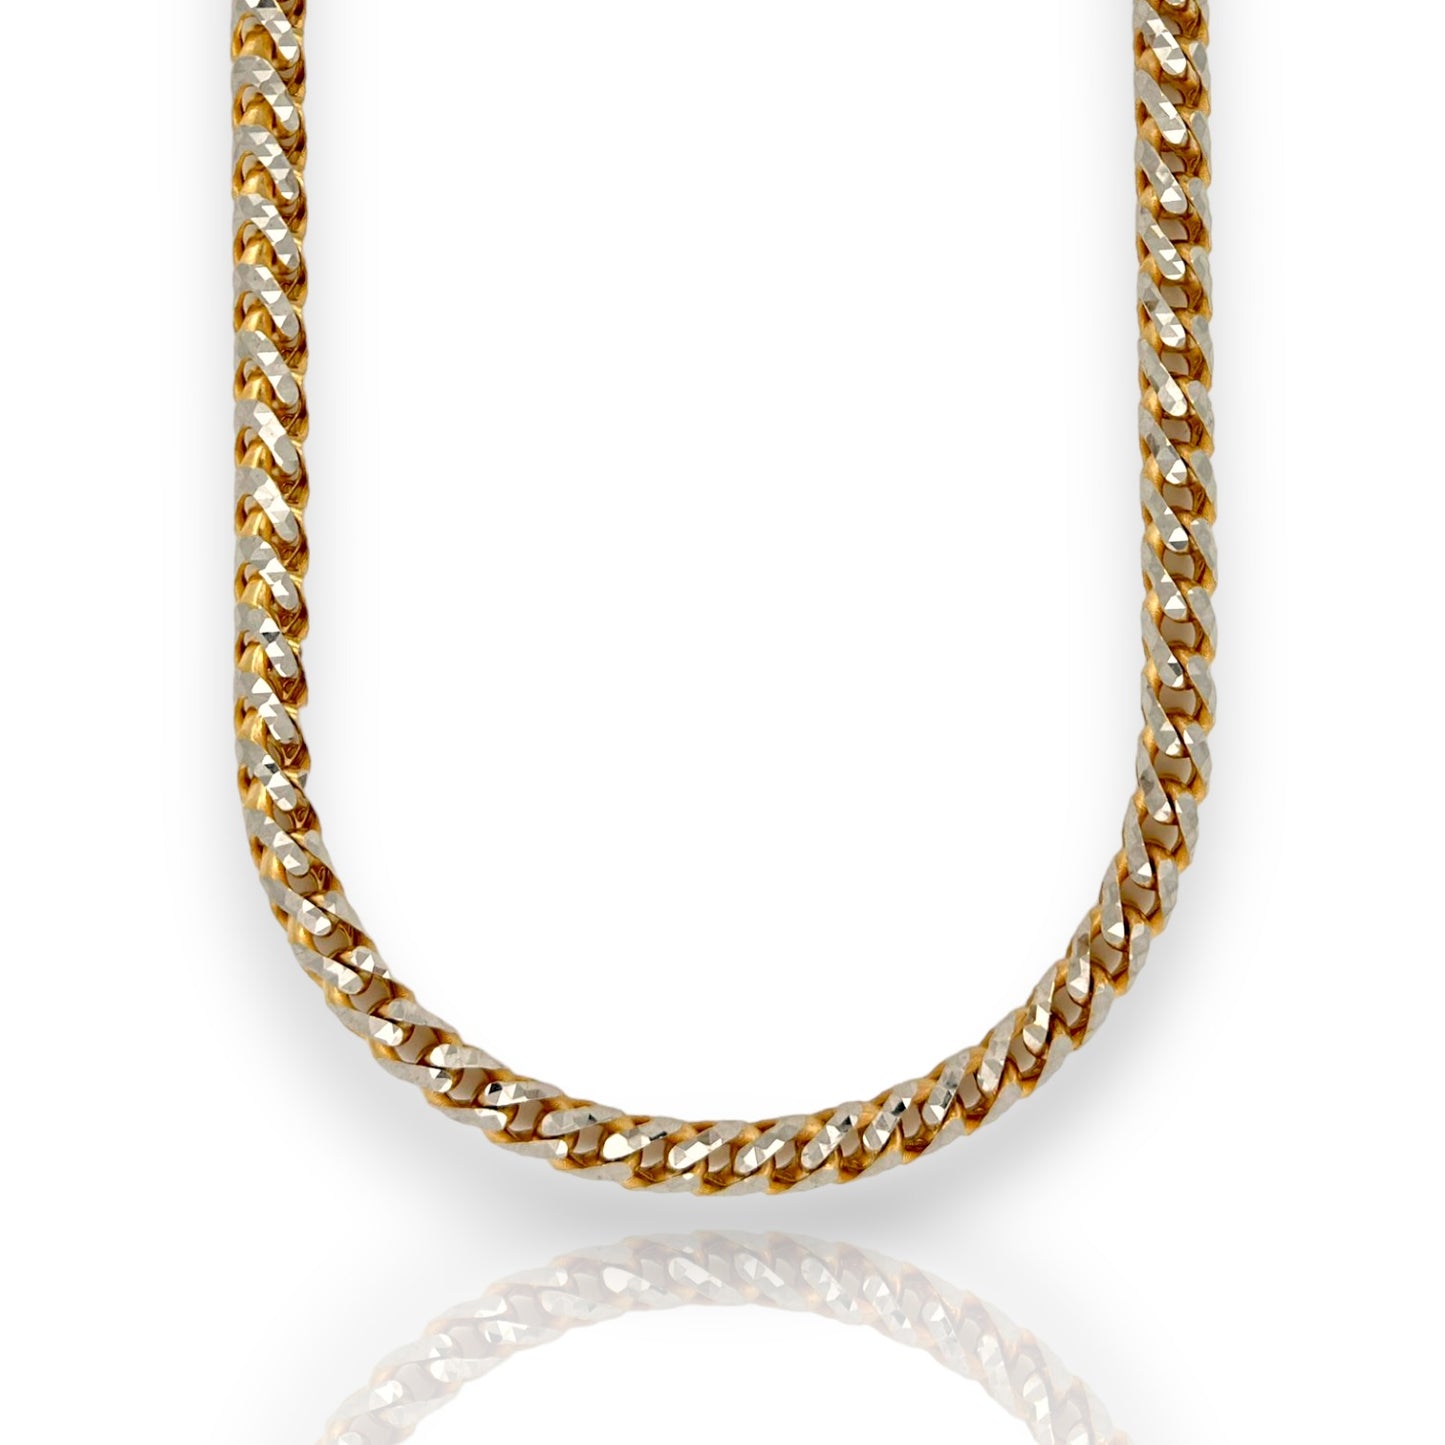 Round Franco Box Chain Necklace - 10K Two Tone Yellow Pave Gold - Solid